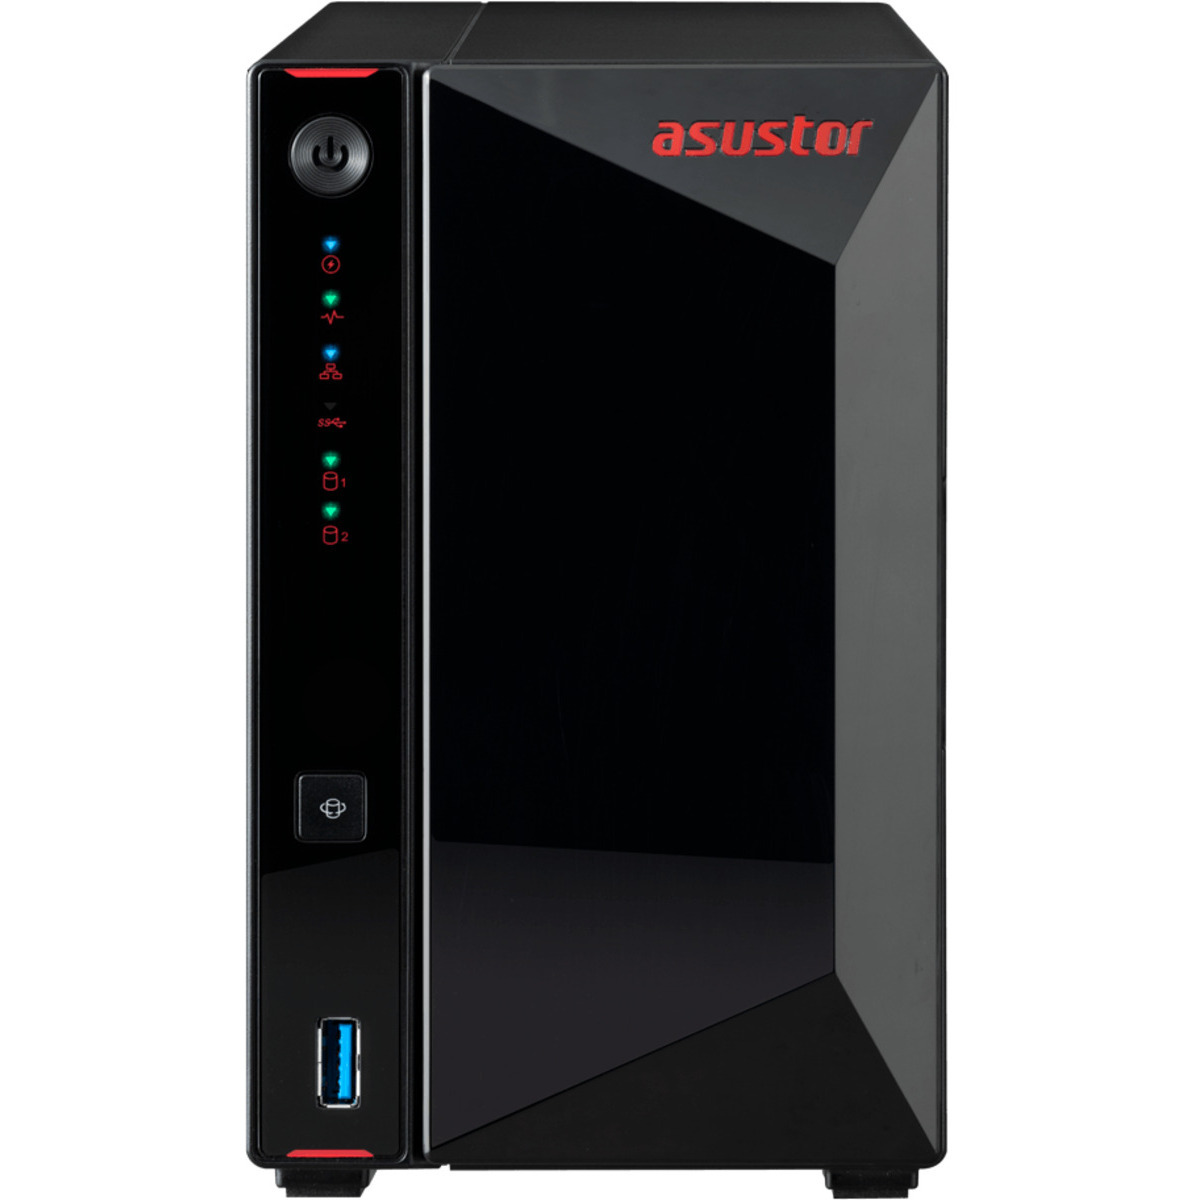 buy $557 ASUSTOR AS5202T Nimbustor 8tb Desktop NAS - Network Attached Storage Device 2x4000gb Seagate BarraCuda ST4000DM004 3.5 7200rpm SATA 6Gb/s HDD CONSUMER Class Drives Installed - Burn-In Tested - FREE RAM UPGRADE - nas headquarters buy network attached storage server device das new raid-5 free shipping usa AS5202T Nimbustor